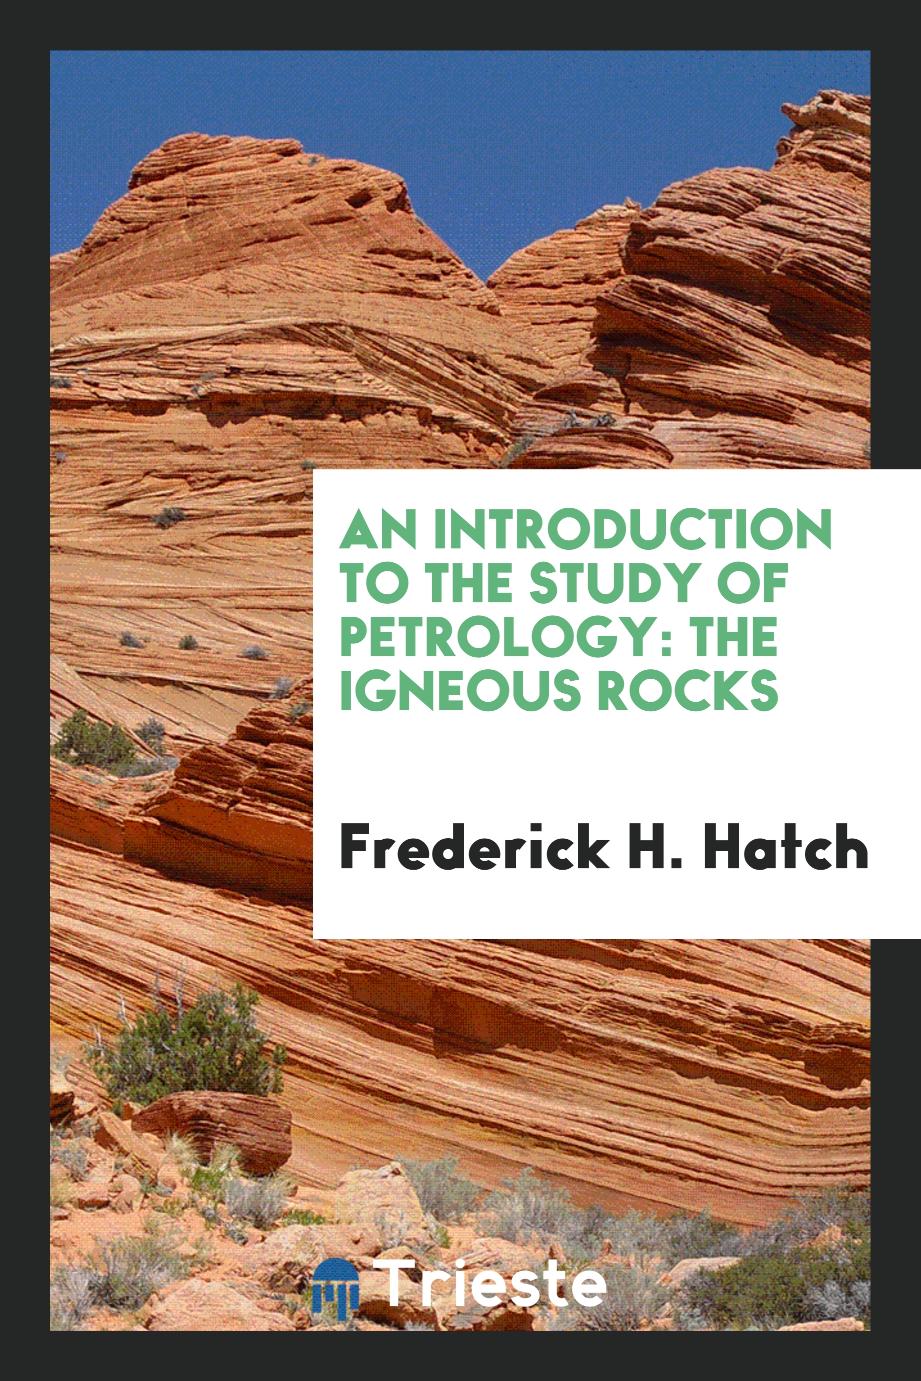 An Introduction to the Study of Petrology: The Igneous Rocks